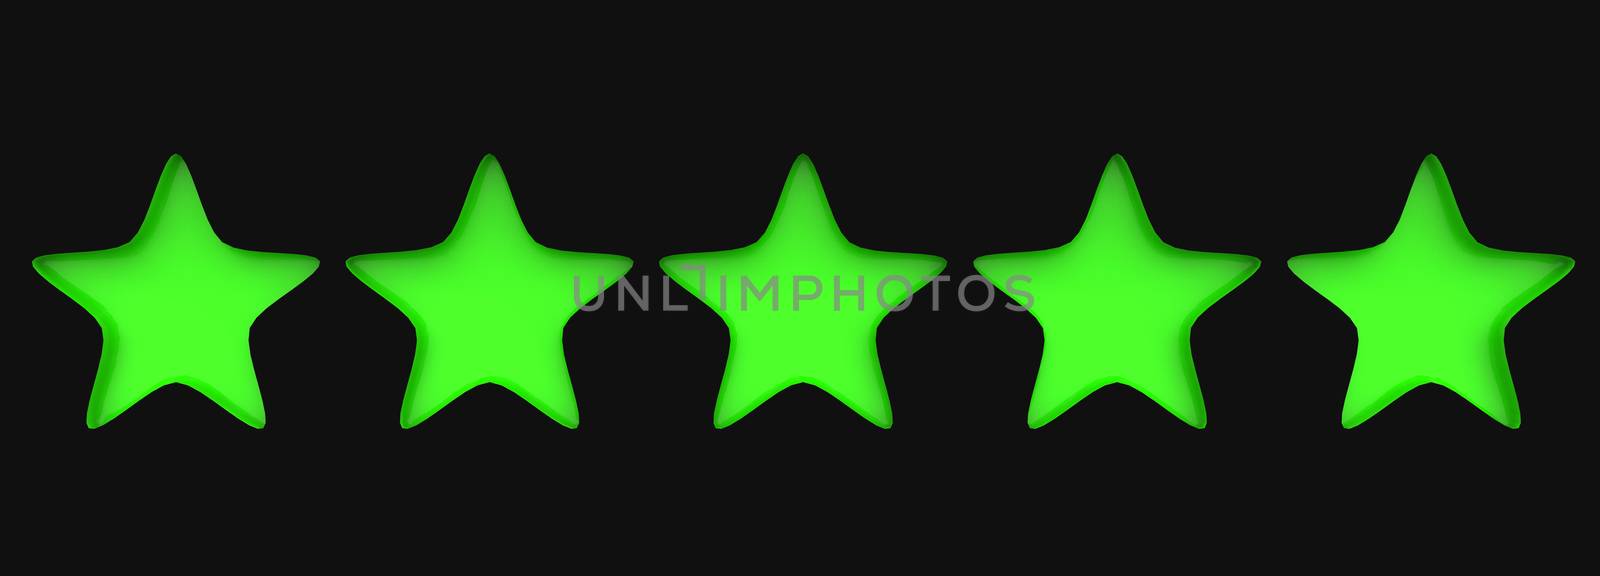 3d five green star on color background. Render and illustration of golden star for premium review by Andreajk3